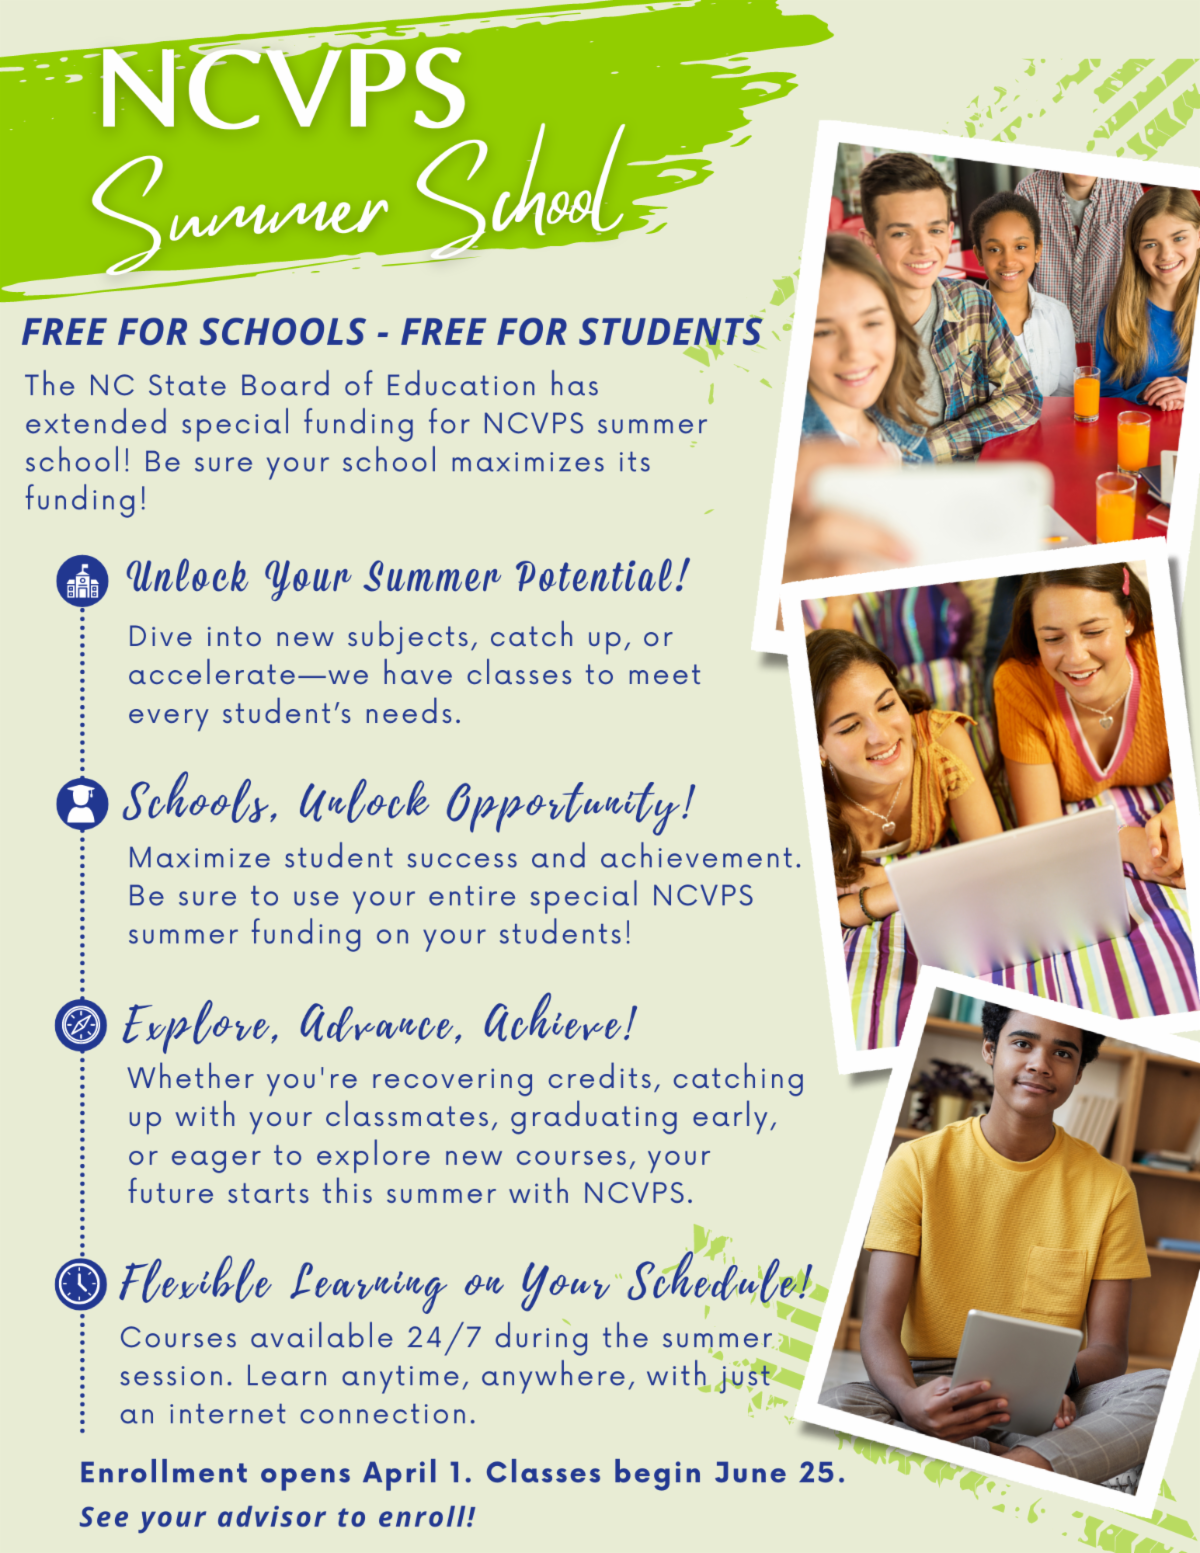 NCVPS Summer School Free for Schools - Free for Students - The NC State Board of Education has extended special funding for NCVPS summer school! Be sure your school maximizes its funding! 스ํ Unlock Your Summer Potential! Dive into new subjects, catch up, or accelerate-we have classes to meet every student's needs. Schools, Uulock Opportunity! Maximize student success and achievement. Be sure to use your entire special NCVPS summer funding on your students! - Explove, Advance, Achieve! Whether you're recovering credits, catching up with your classmates, graduating early, or eager to explore new courses, your future starts this summer with NCVPS. (3) Flexible Learning on Your "Schedule! Courses available 24/7 during the summer session. Learn anytime, anywhere, with just an internet connection. Enrollment opens April 1. Classes begin June 25. See your advisor to enroll!